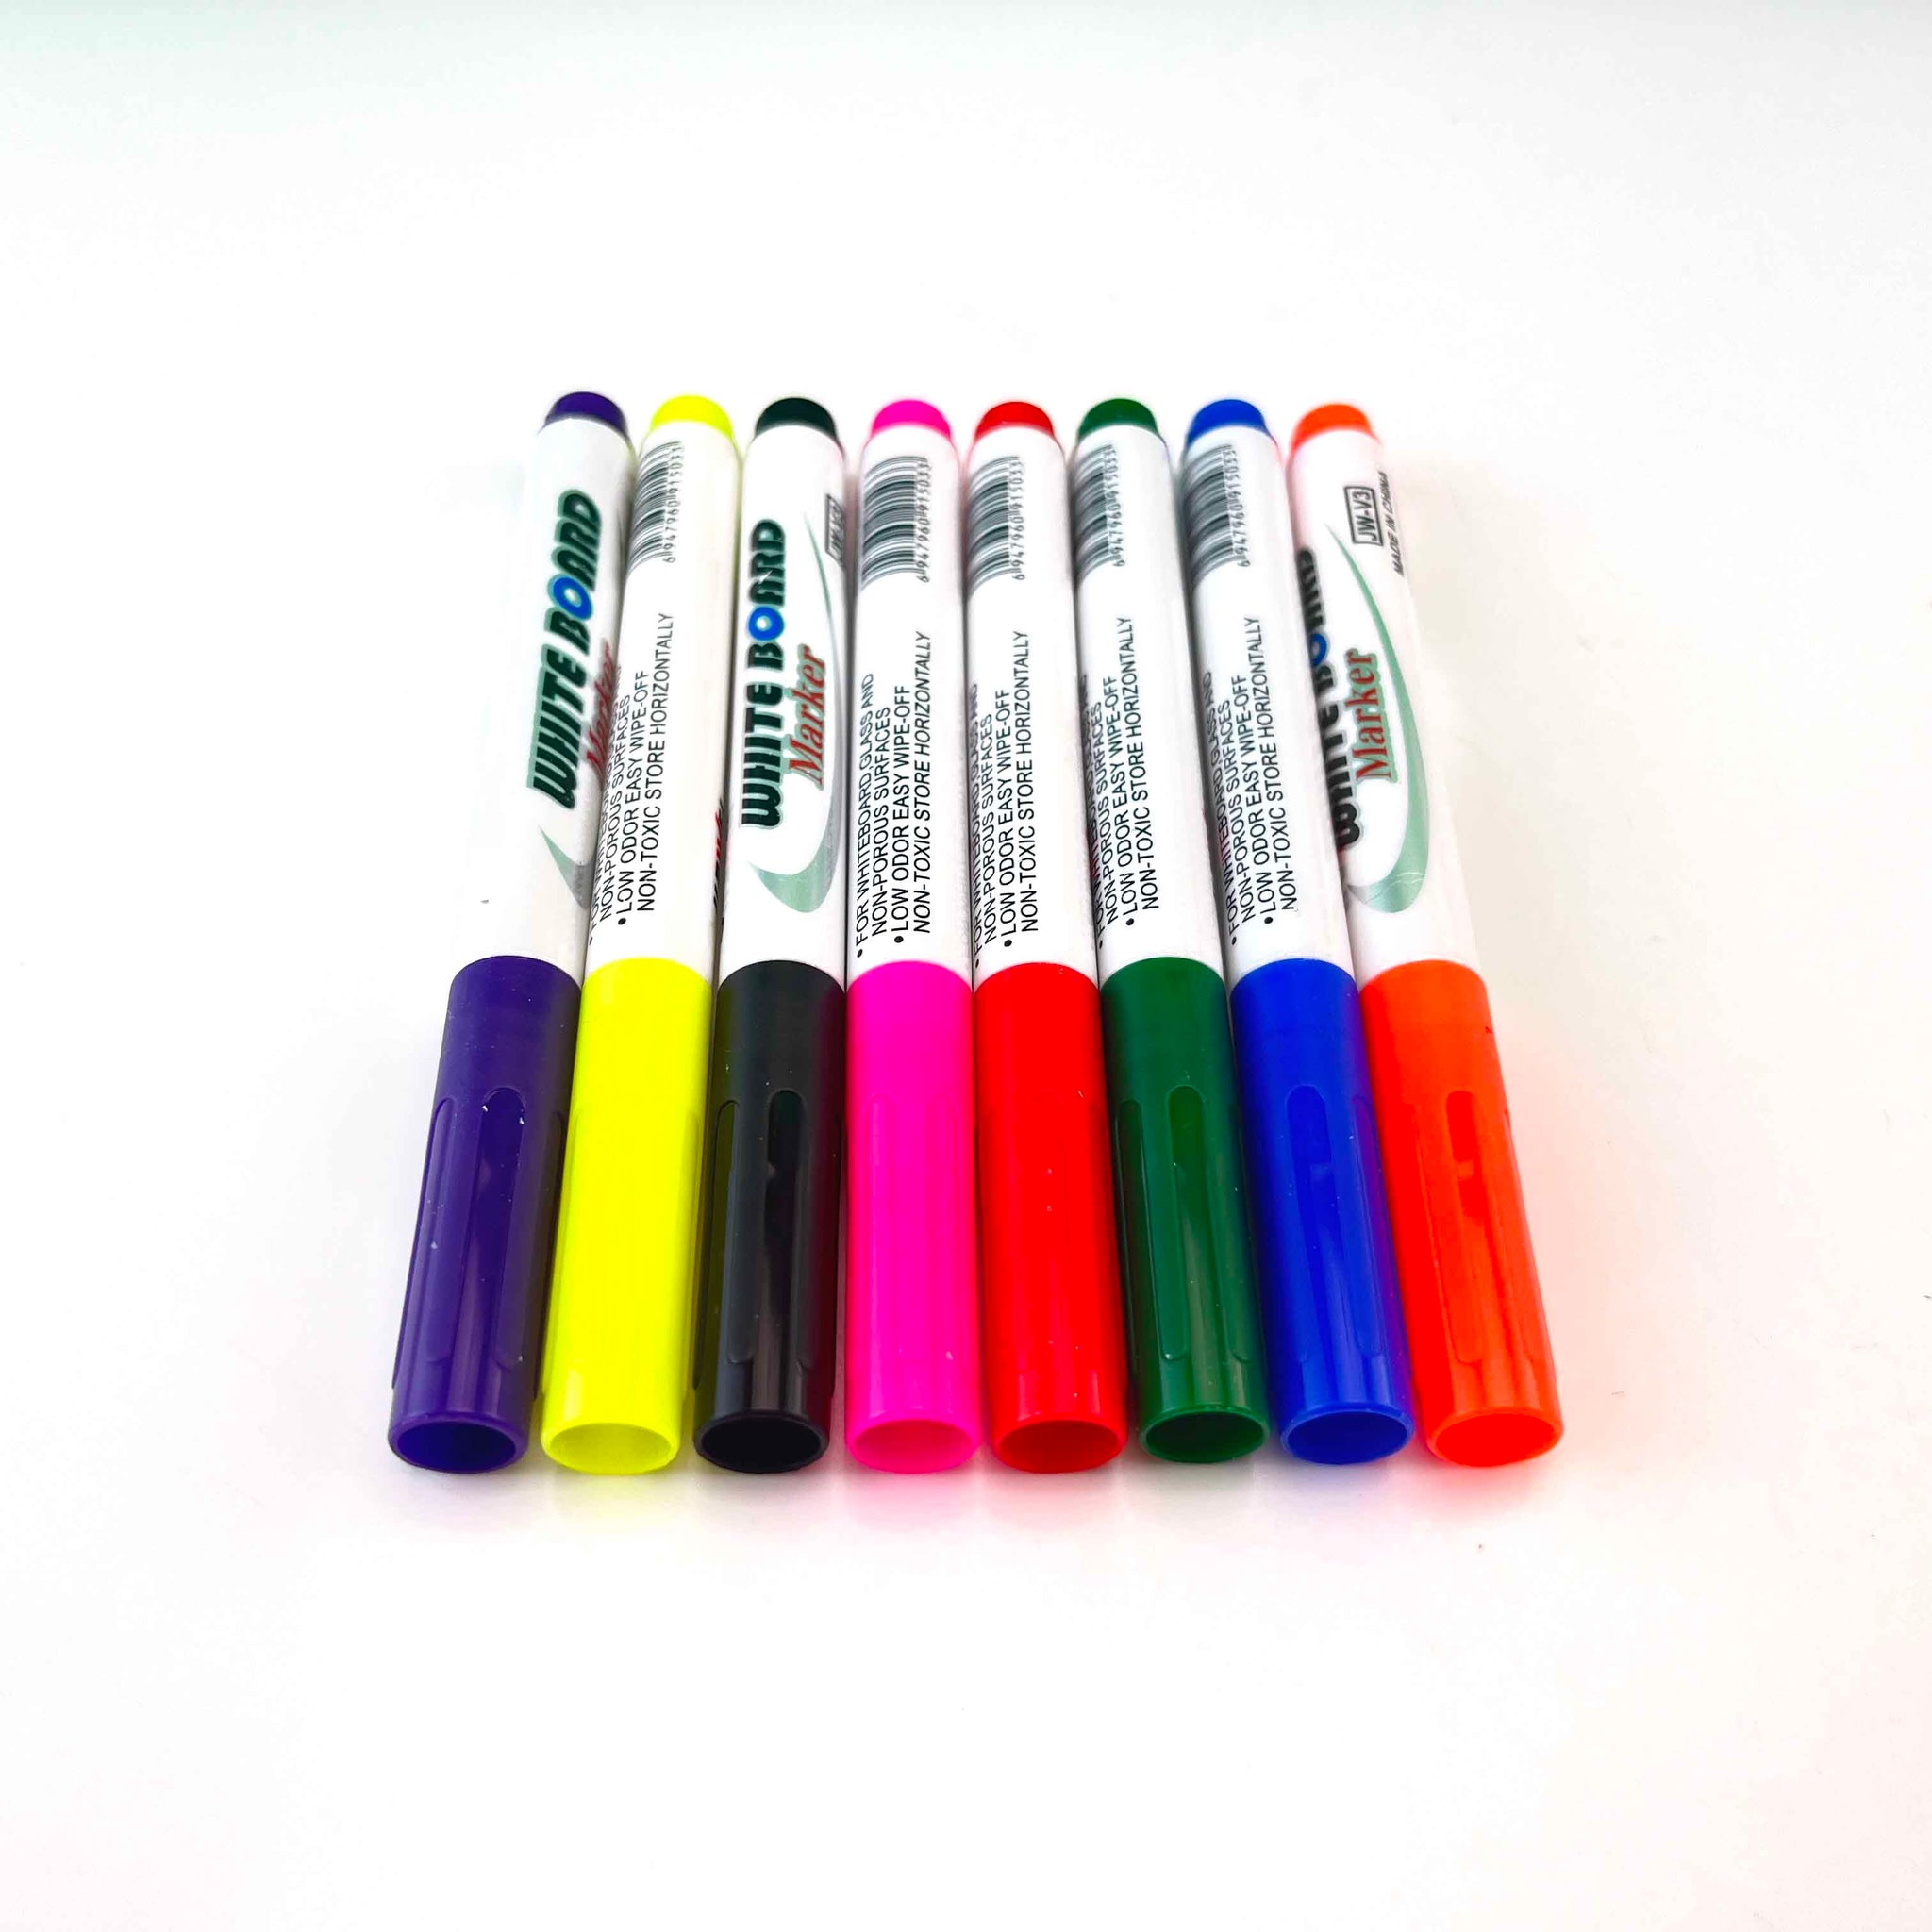 Colorful Early Education Toys Water Drawing Magical Water Floating Doodle  Pen Whiteboard Markers Mark Pens Painting